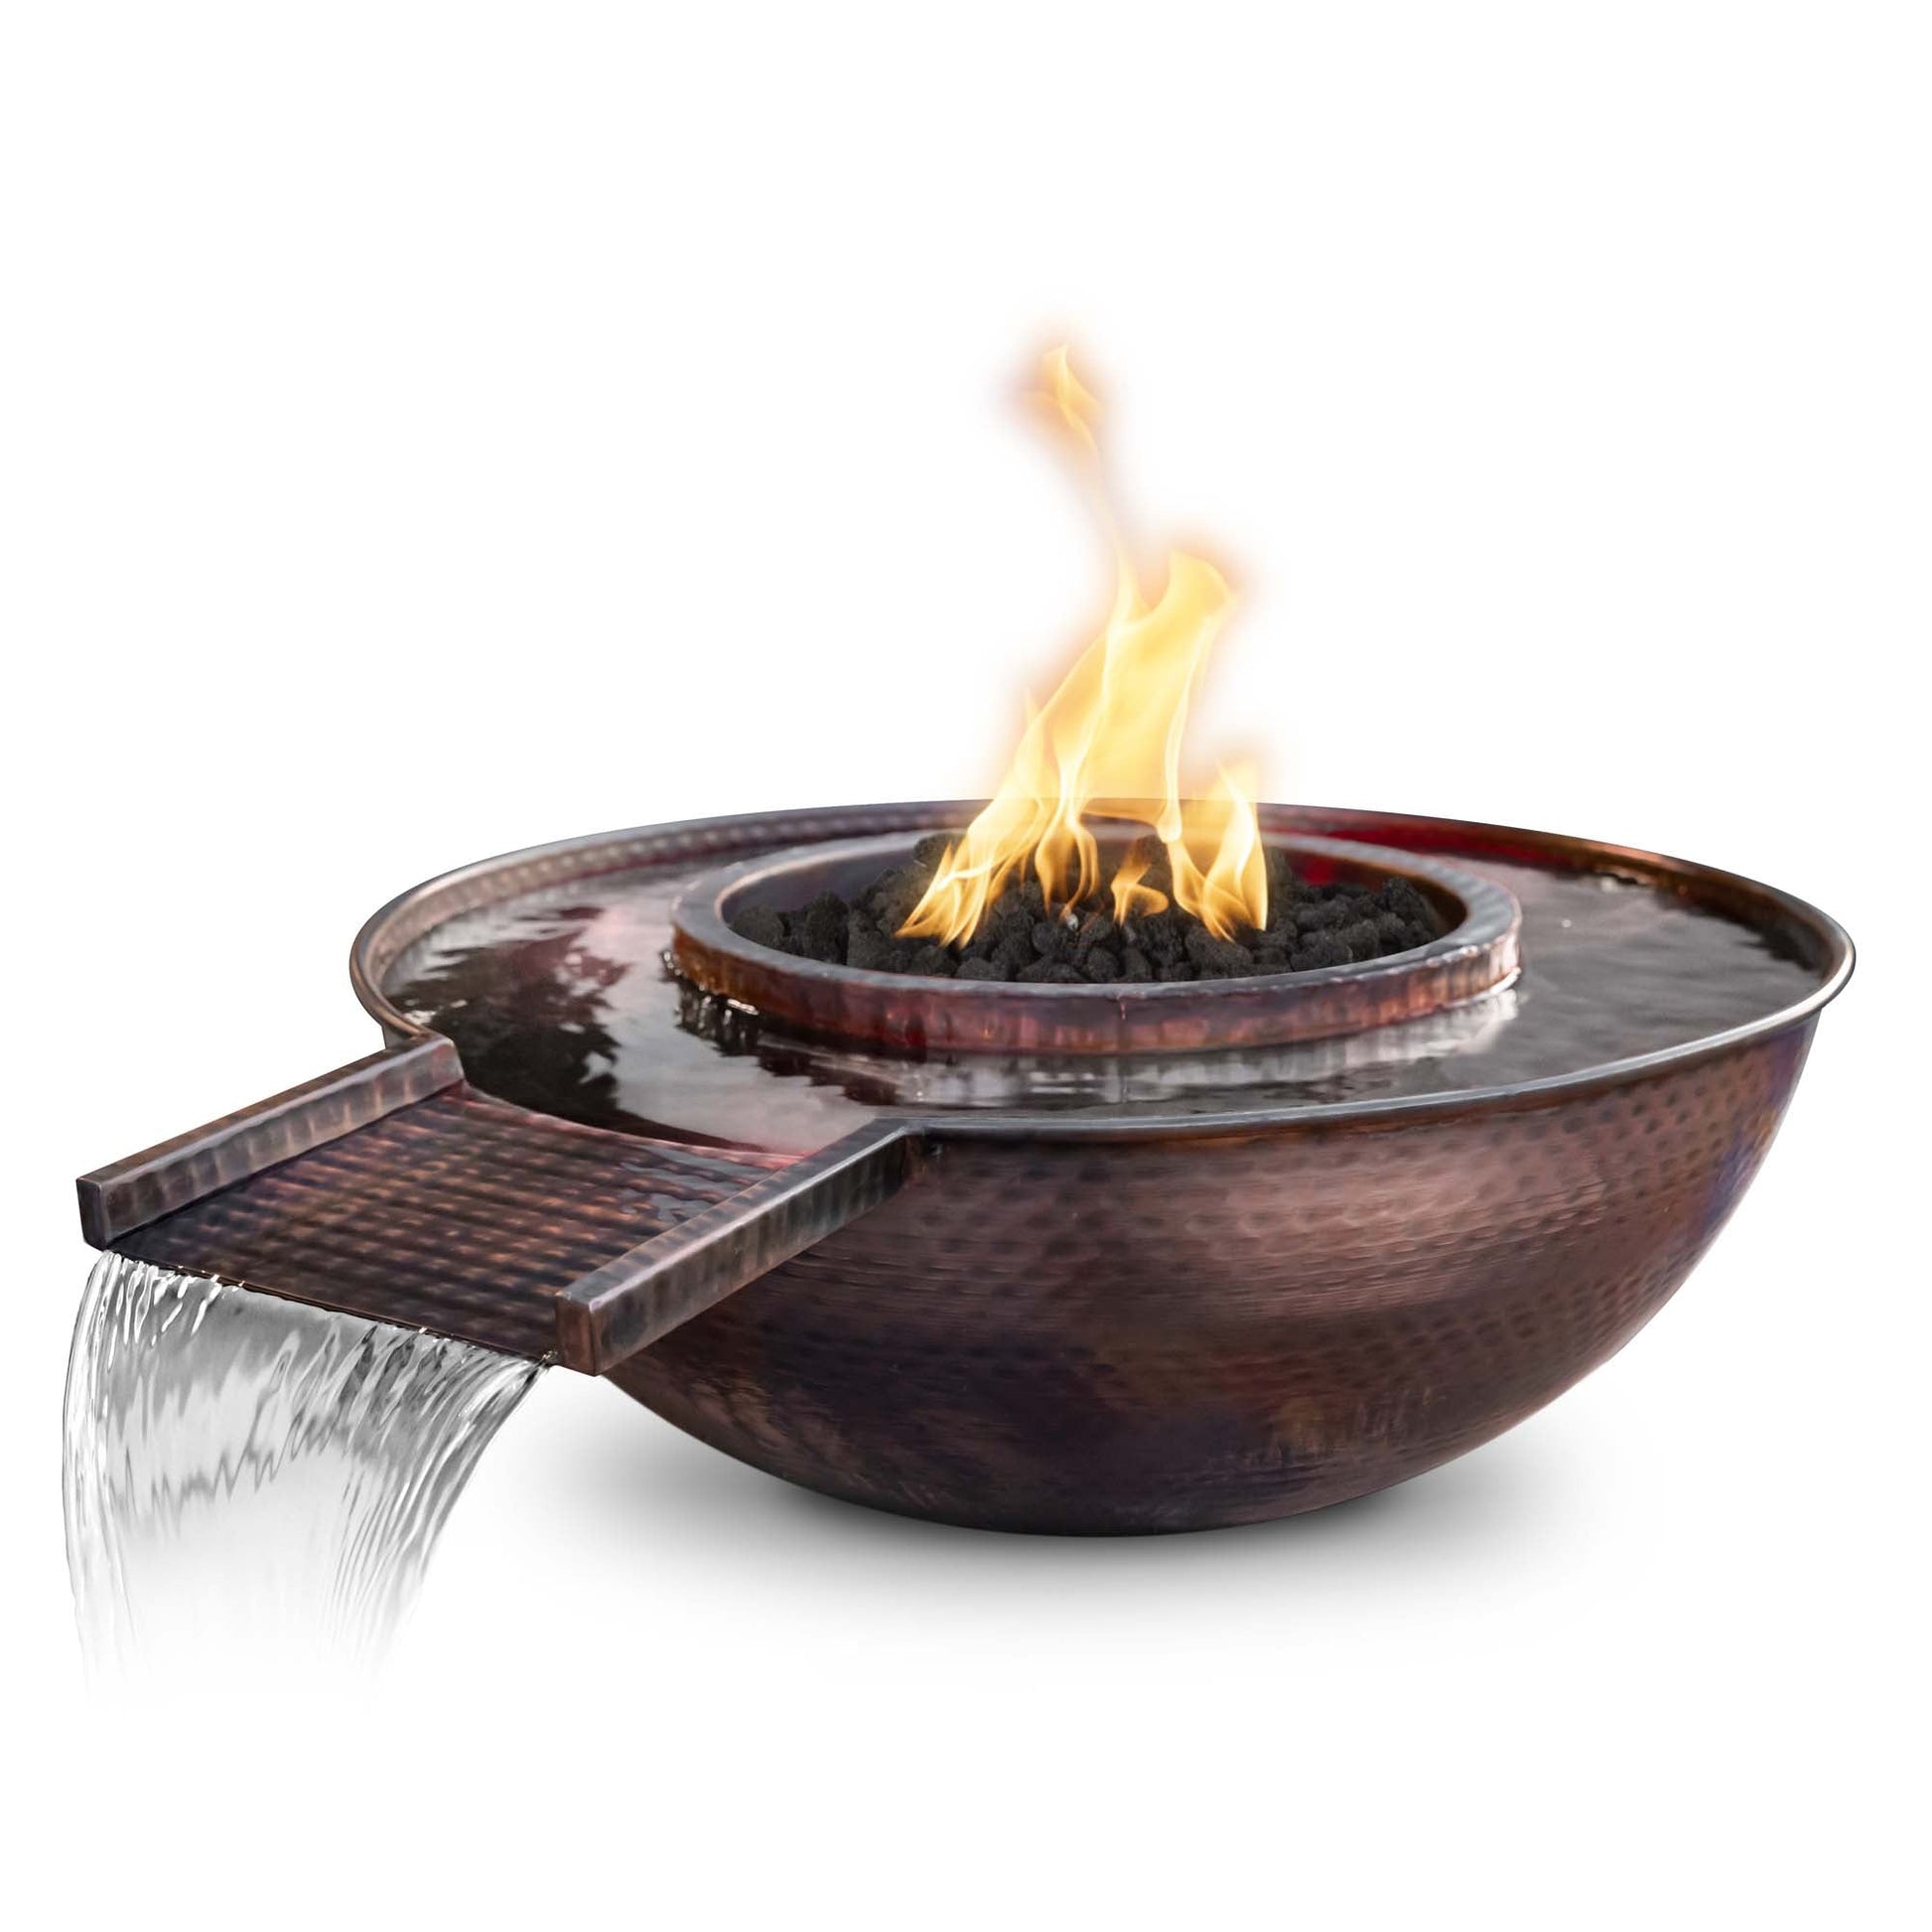 27" Sedona Hammered Copper Fire and Water Bowl - Gravity Spill - Match Lit-Novel Home